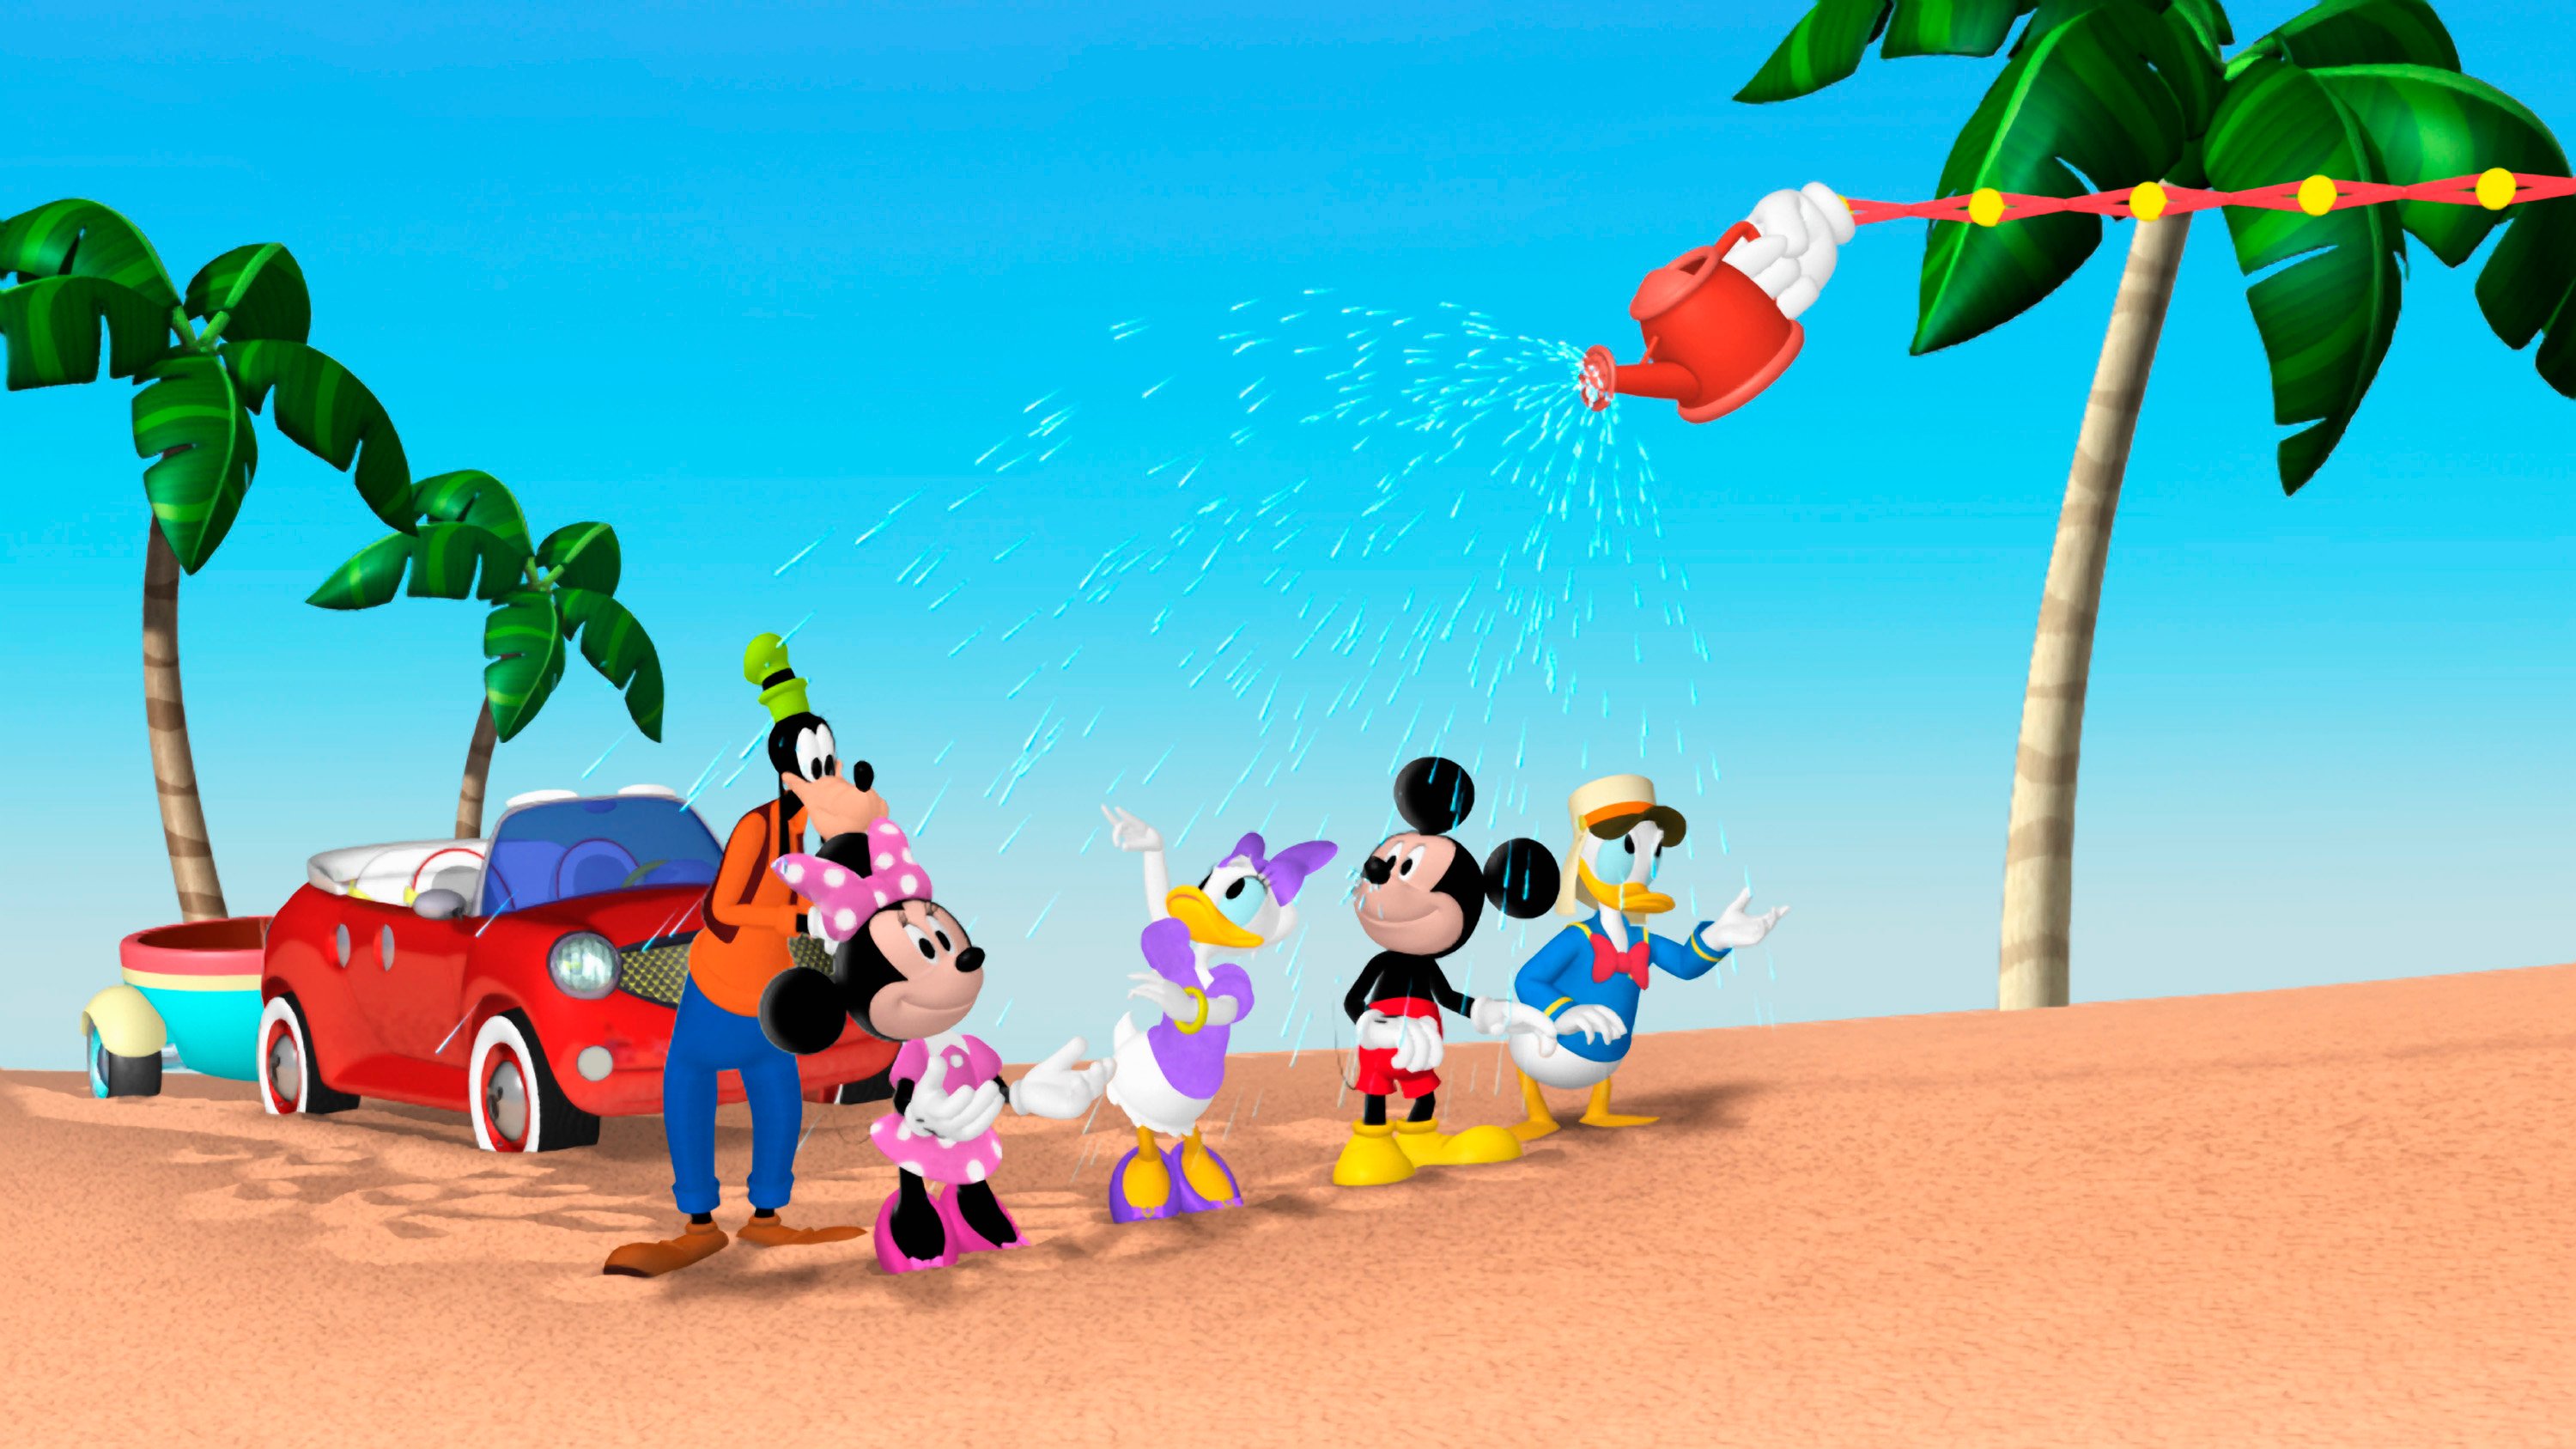 'Mickey Mouse' Clubhouse' episode titled 'Donald of the Desert'